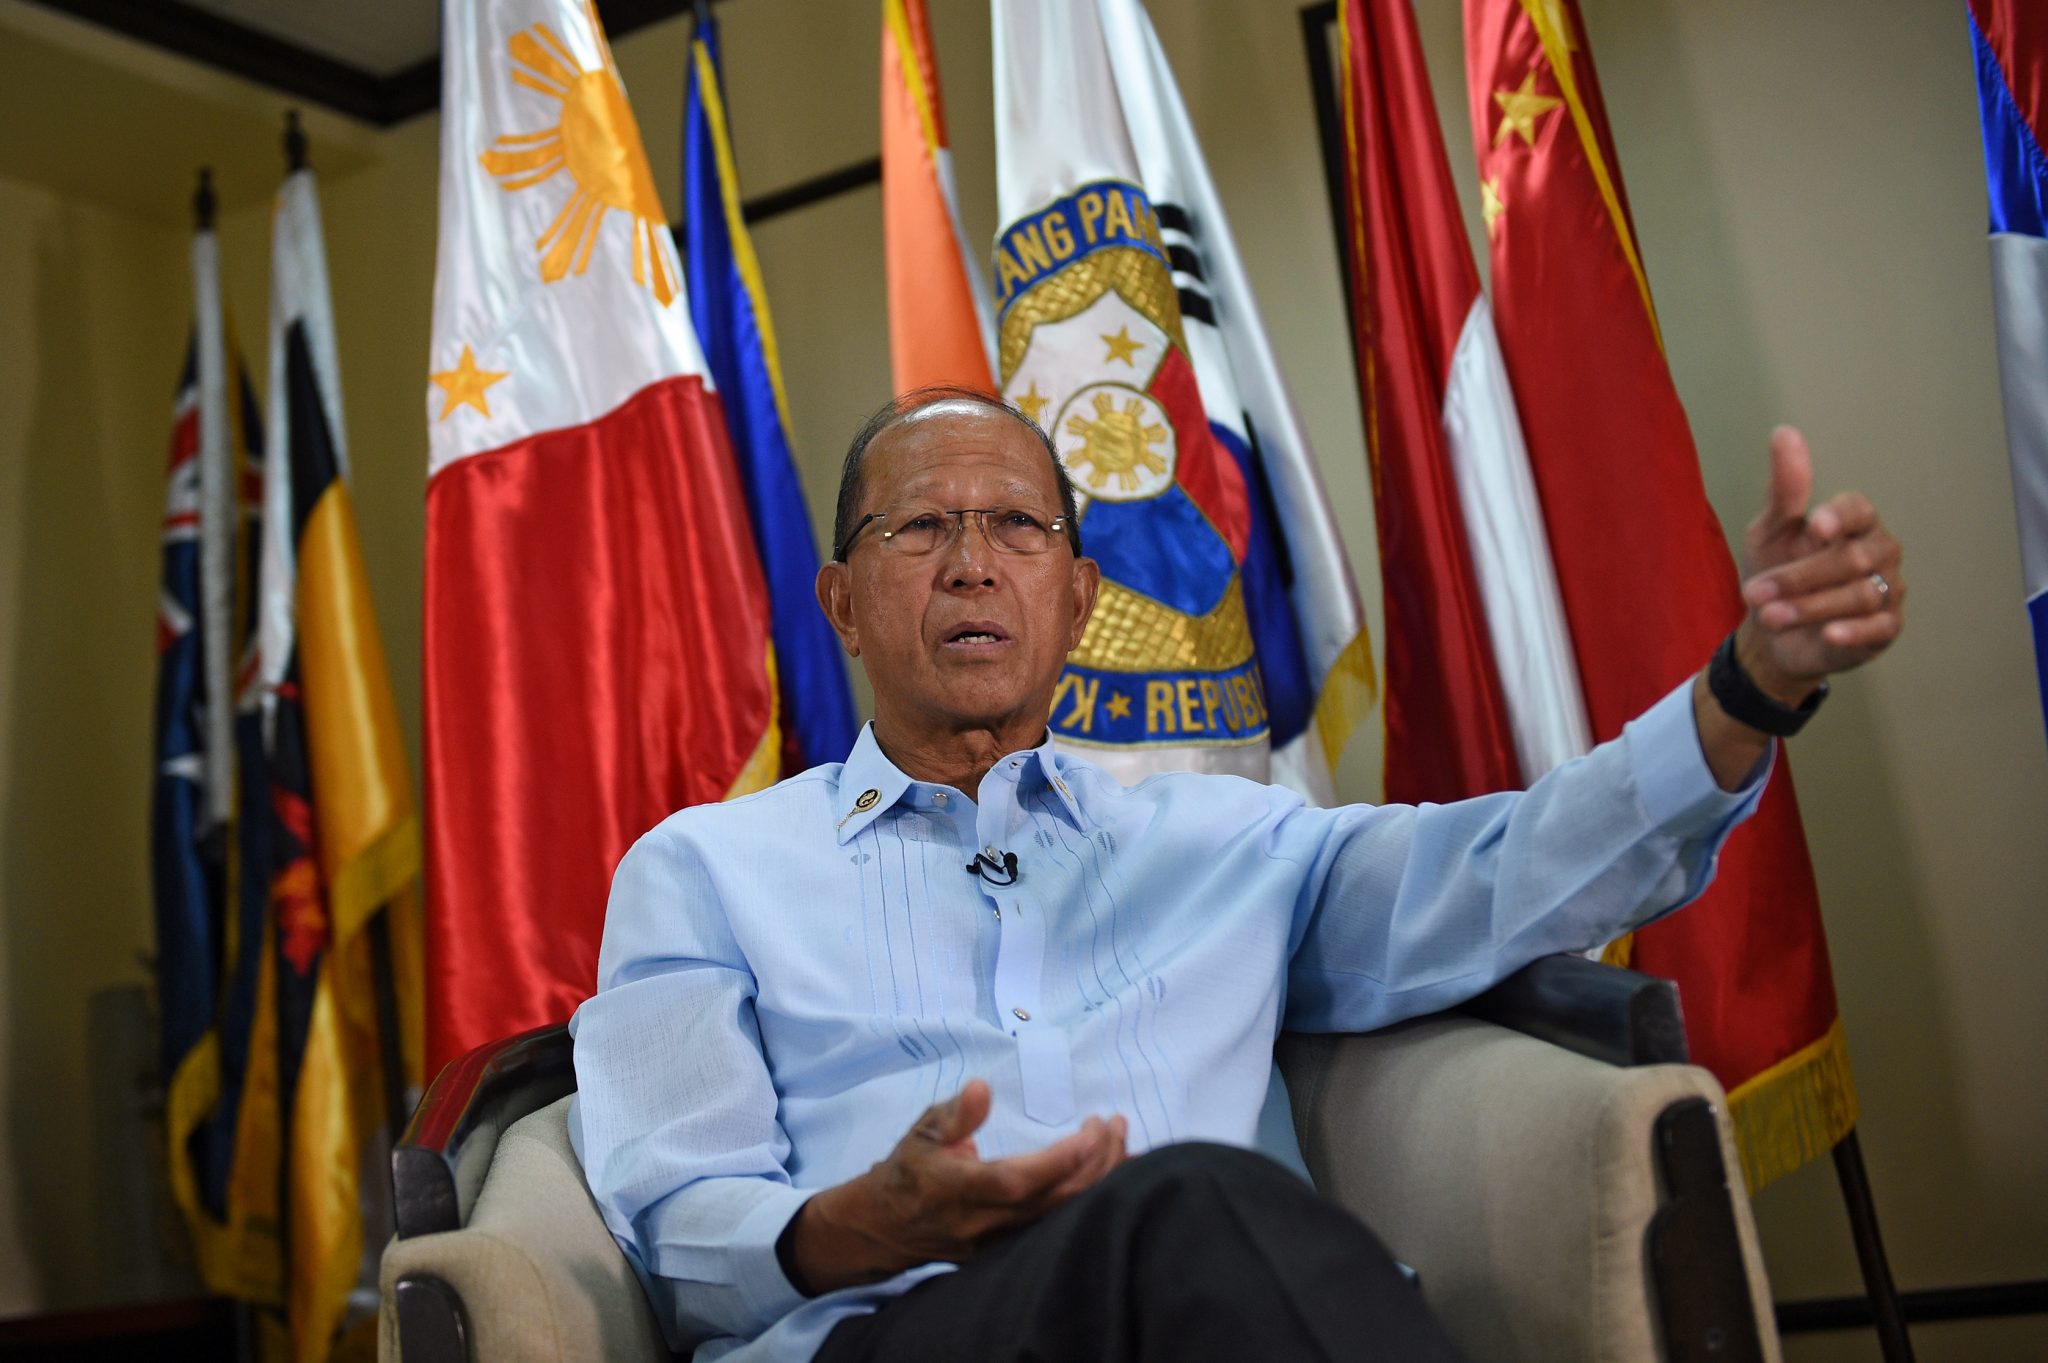 Philippine Defence Secretary Delfin Lorenzana takes part in an interview with AFP at the defence offices in Manila on February 7, 2017. Manila expects China to try to build on a reef off the coast of the Philippines, the country's defence secretary said February 7, adding this would be "unacceptable" in the flashpoint waterway. / AFP PHOTO / TED ALJIBE